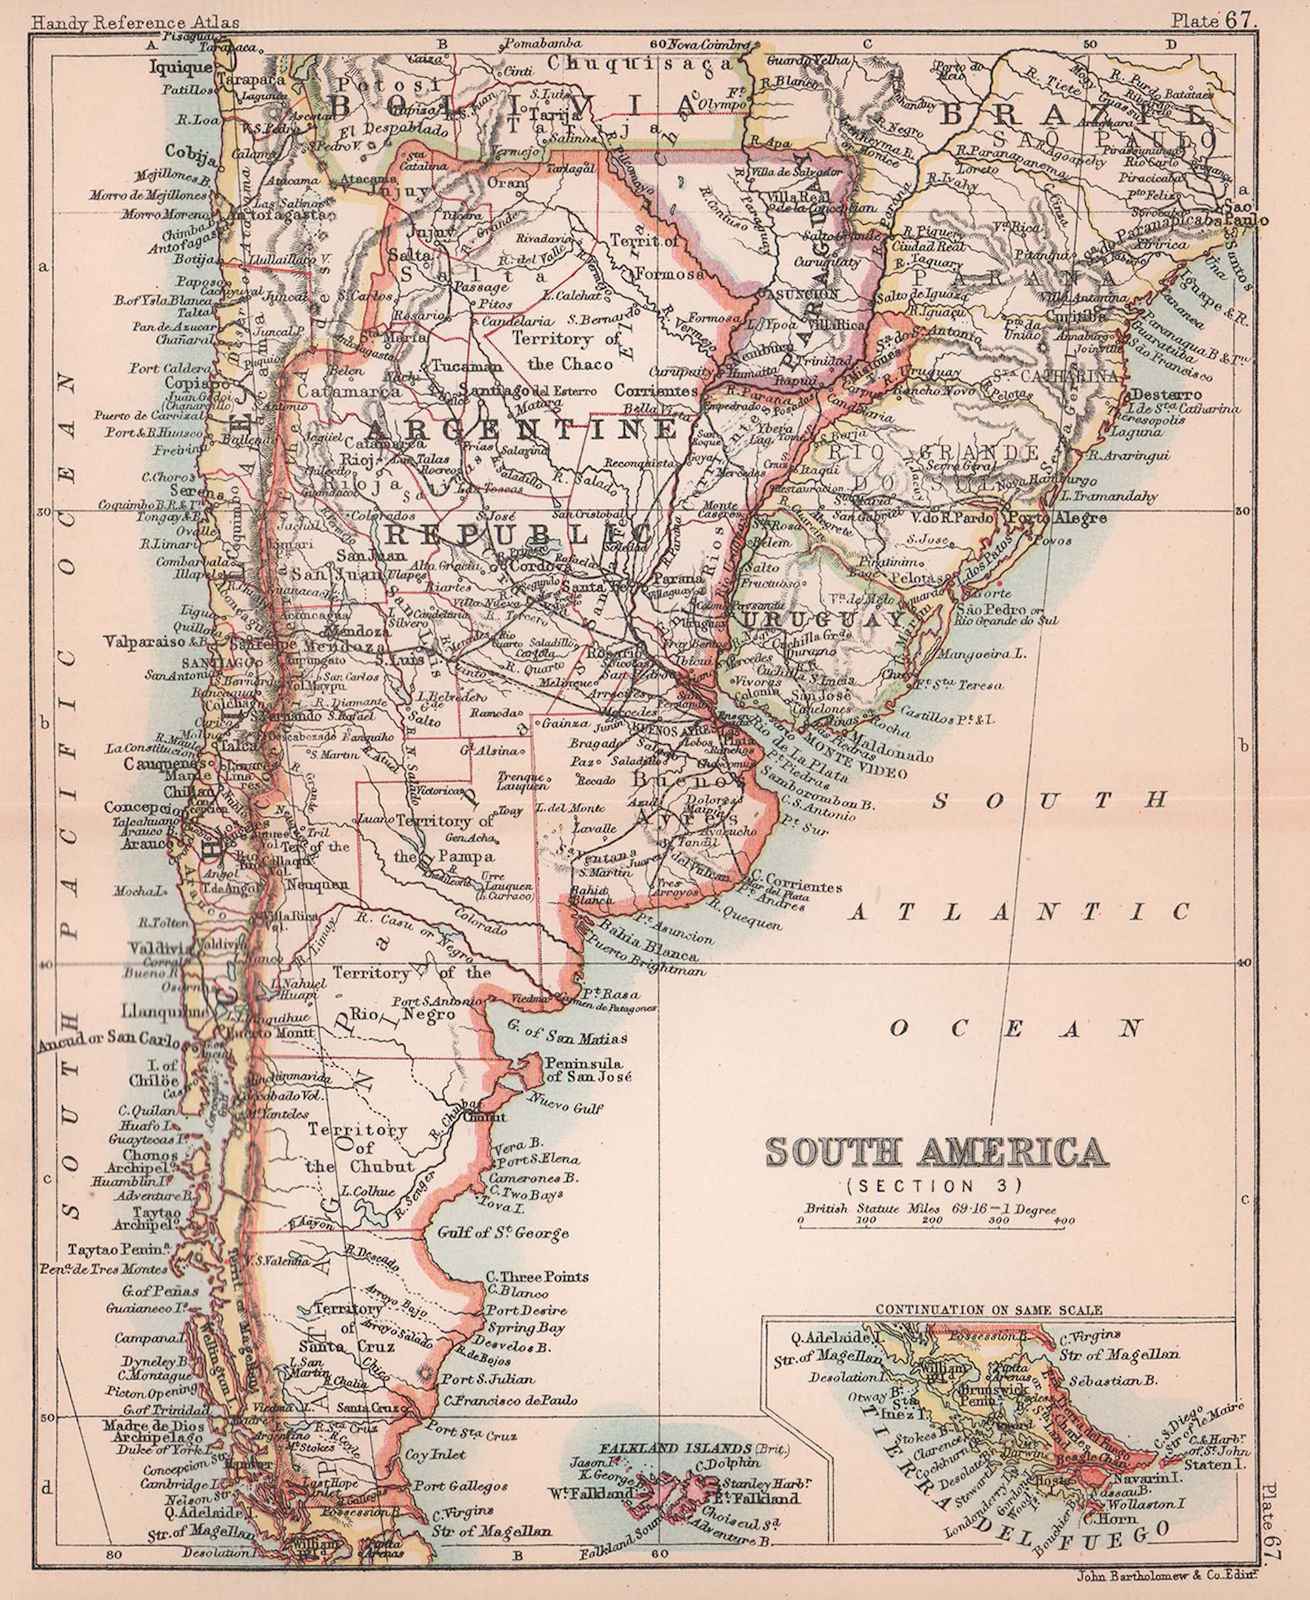 South America #3. Argentina Chile Patagonia Paraguay. BARTHOLOMEW 1893 old map